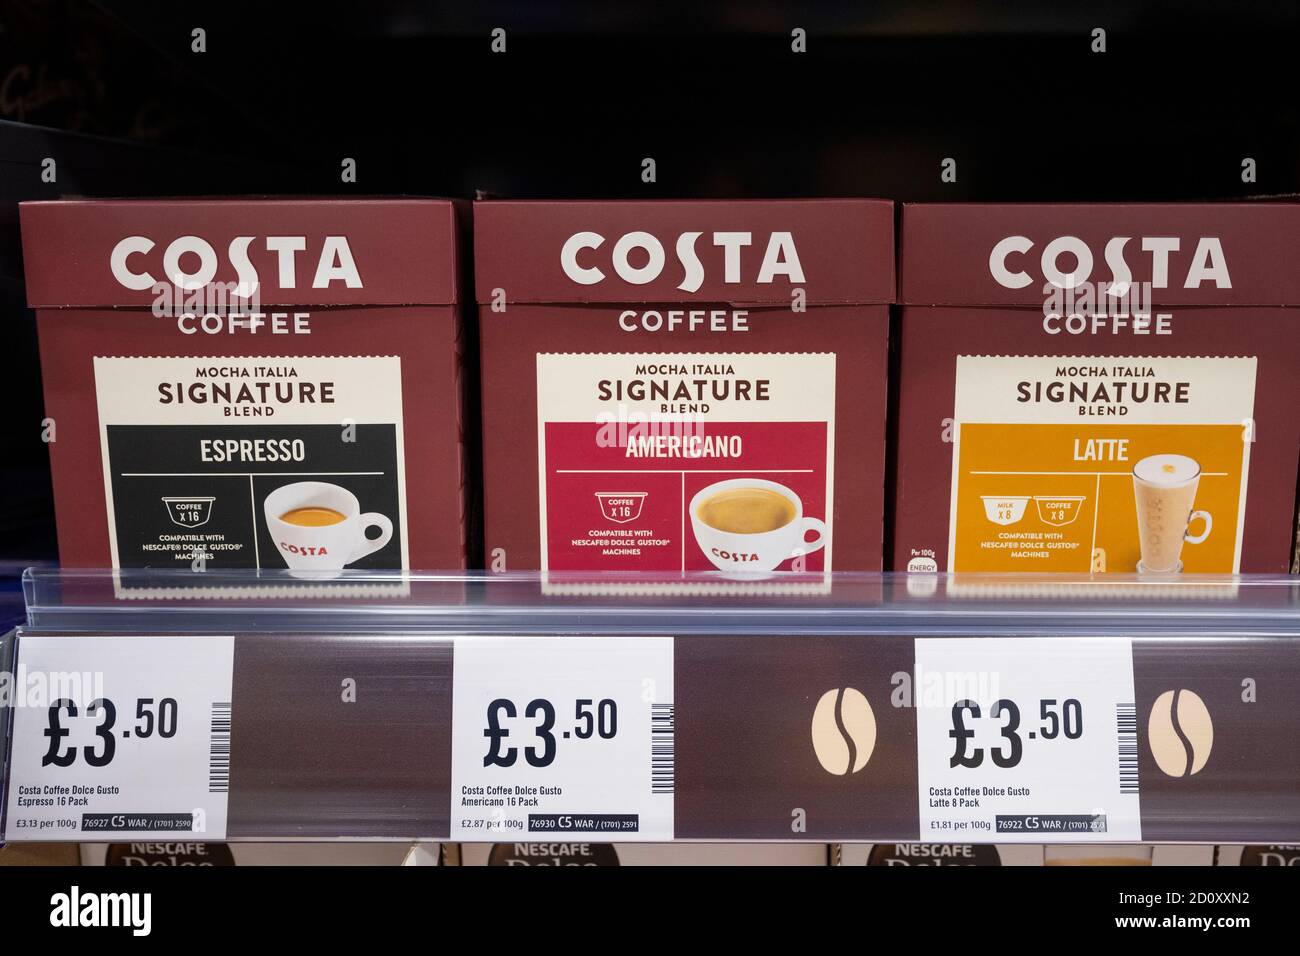 Packets of Costa Coffee for sale in a supermarket on a shelf in Cardiff, Wales, United Kingdom. Stock Photo